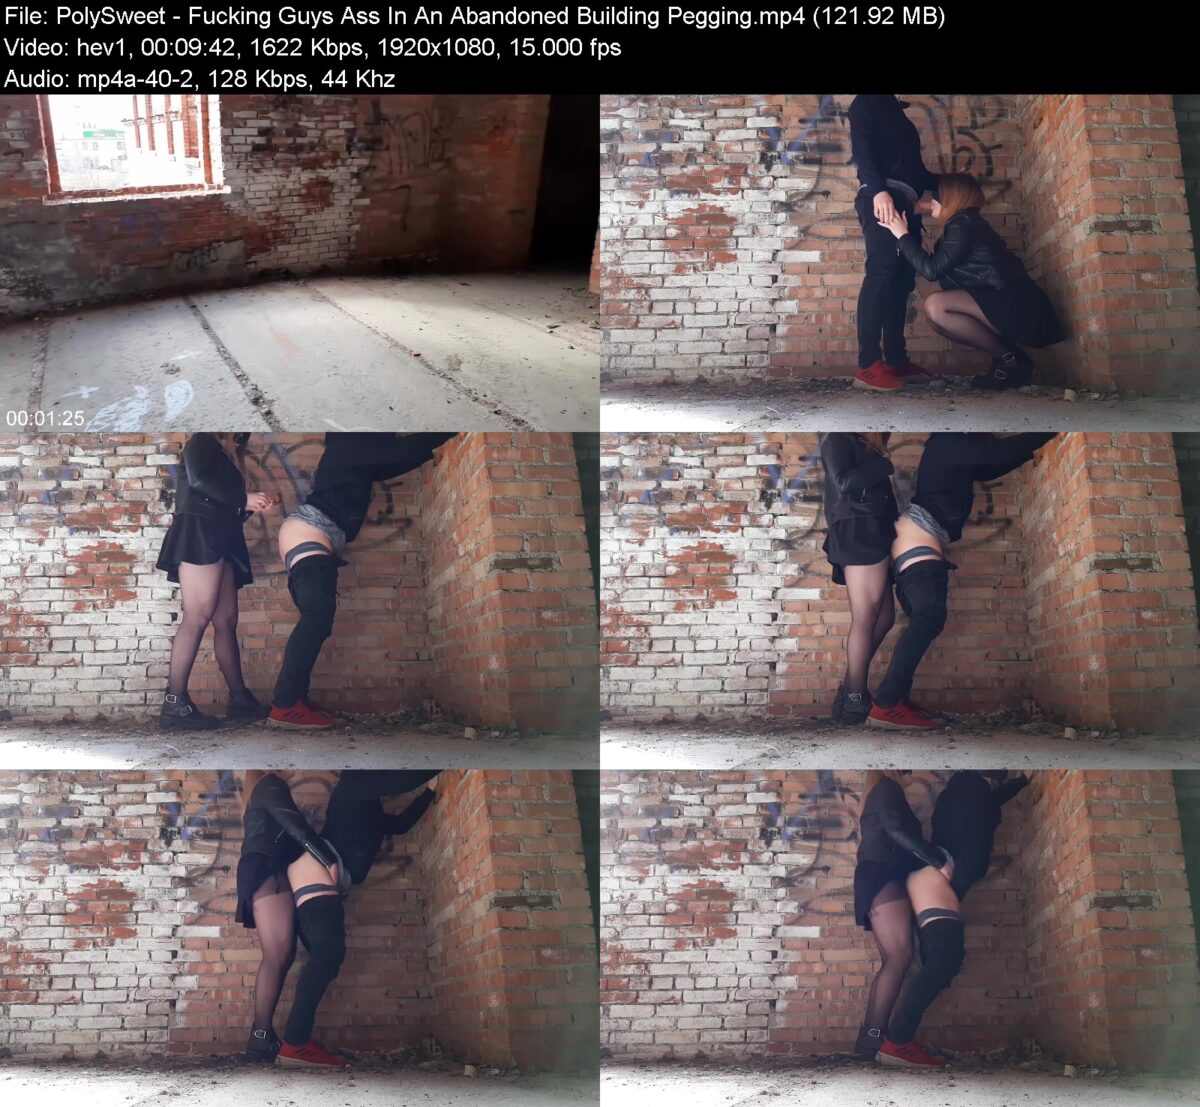 PolySweet in Fucking Guys Ass In An Abandoned Building Pegging